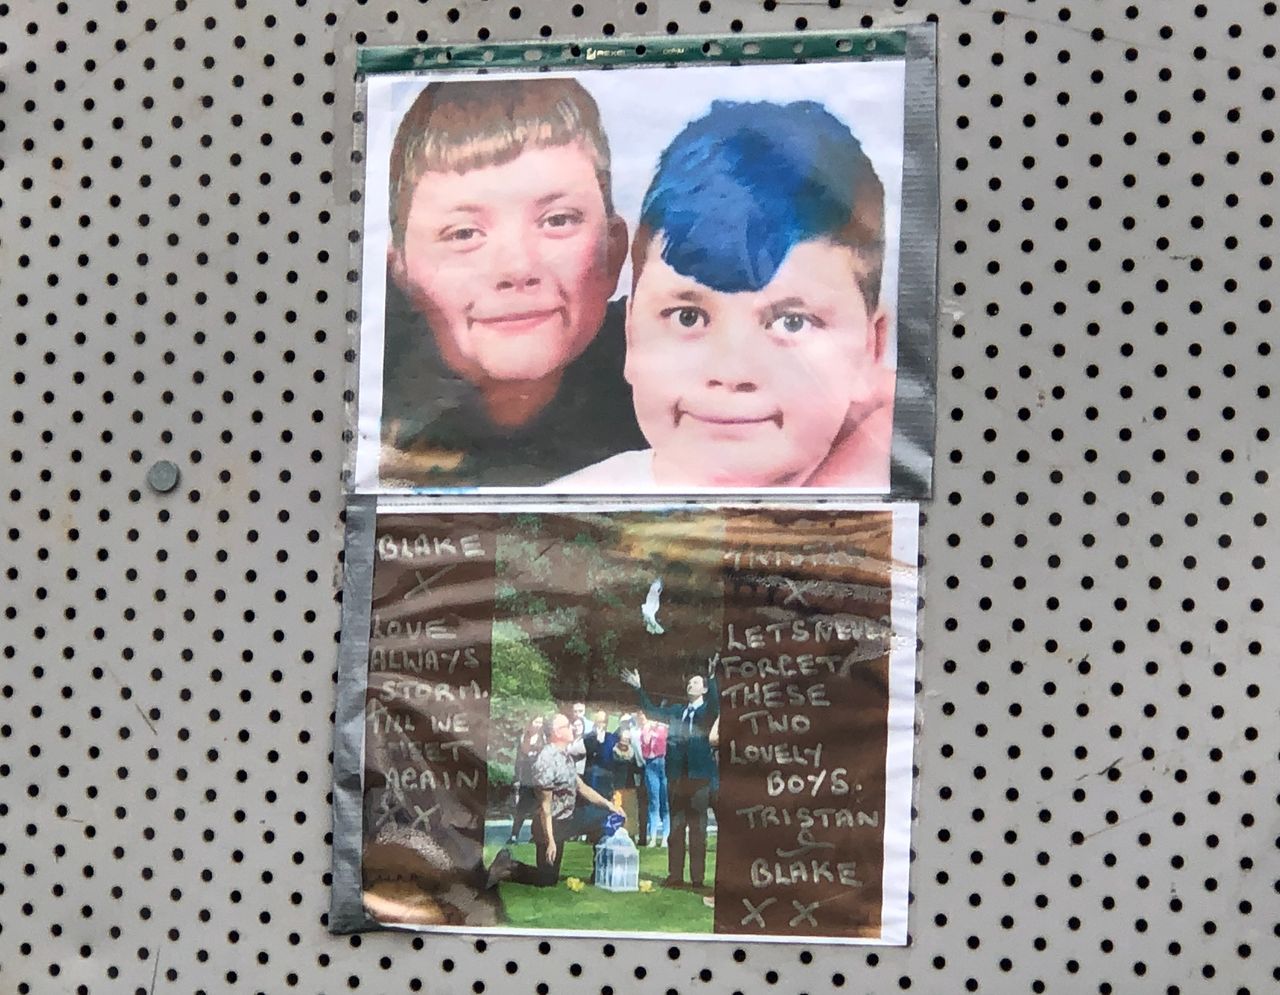 Photos on the boarded up property in Shiregreen, Sheffield, paying tribute to Blake Barrass, 14 and Tristan Barrass, 13